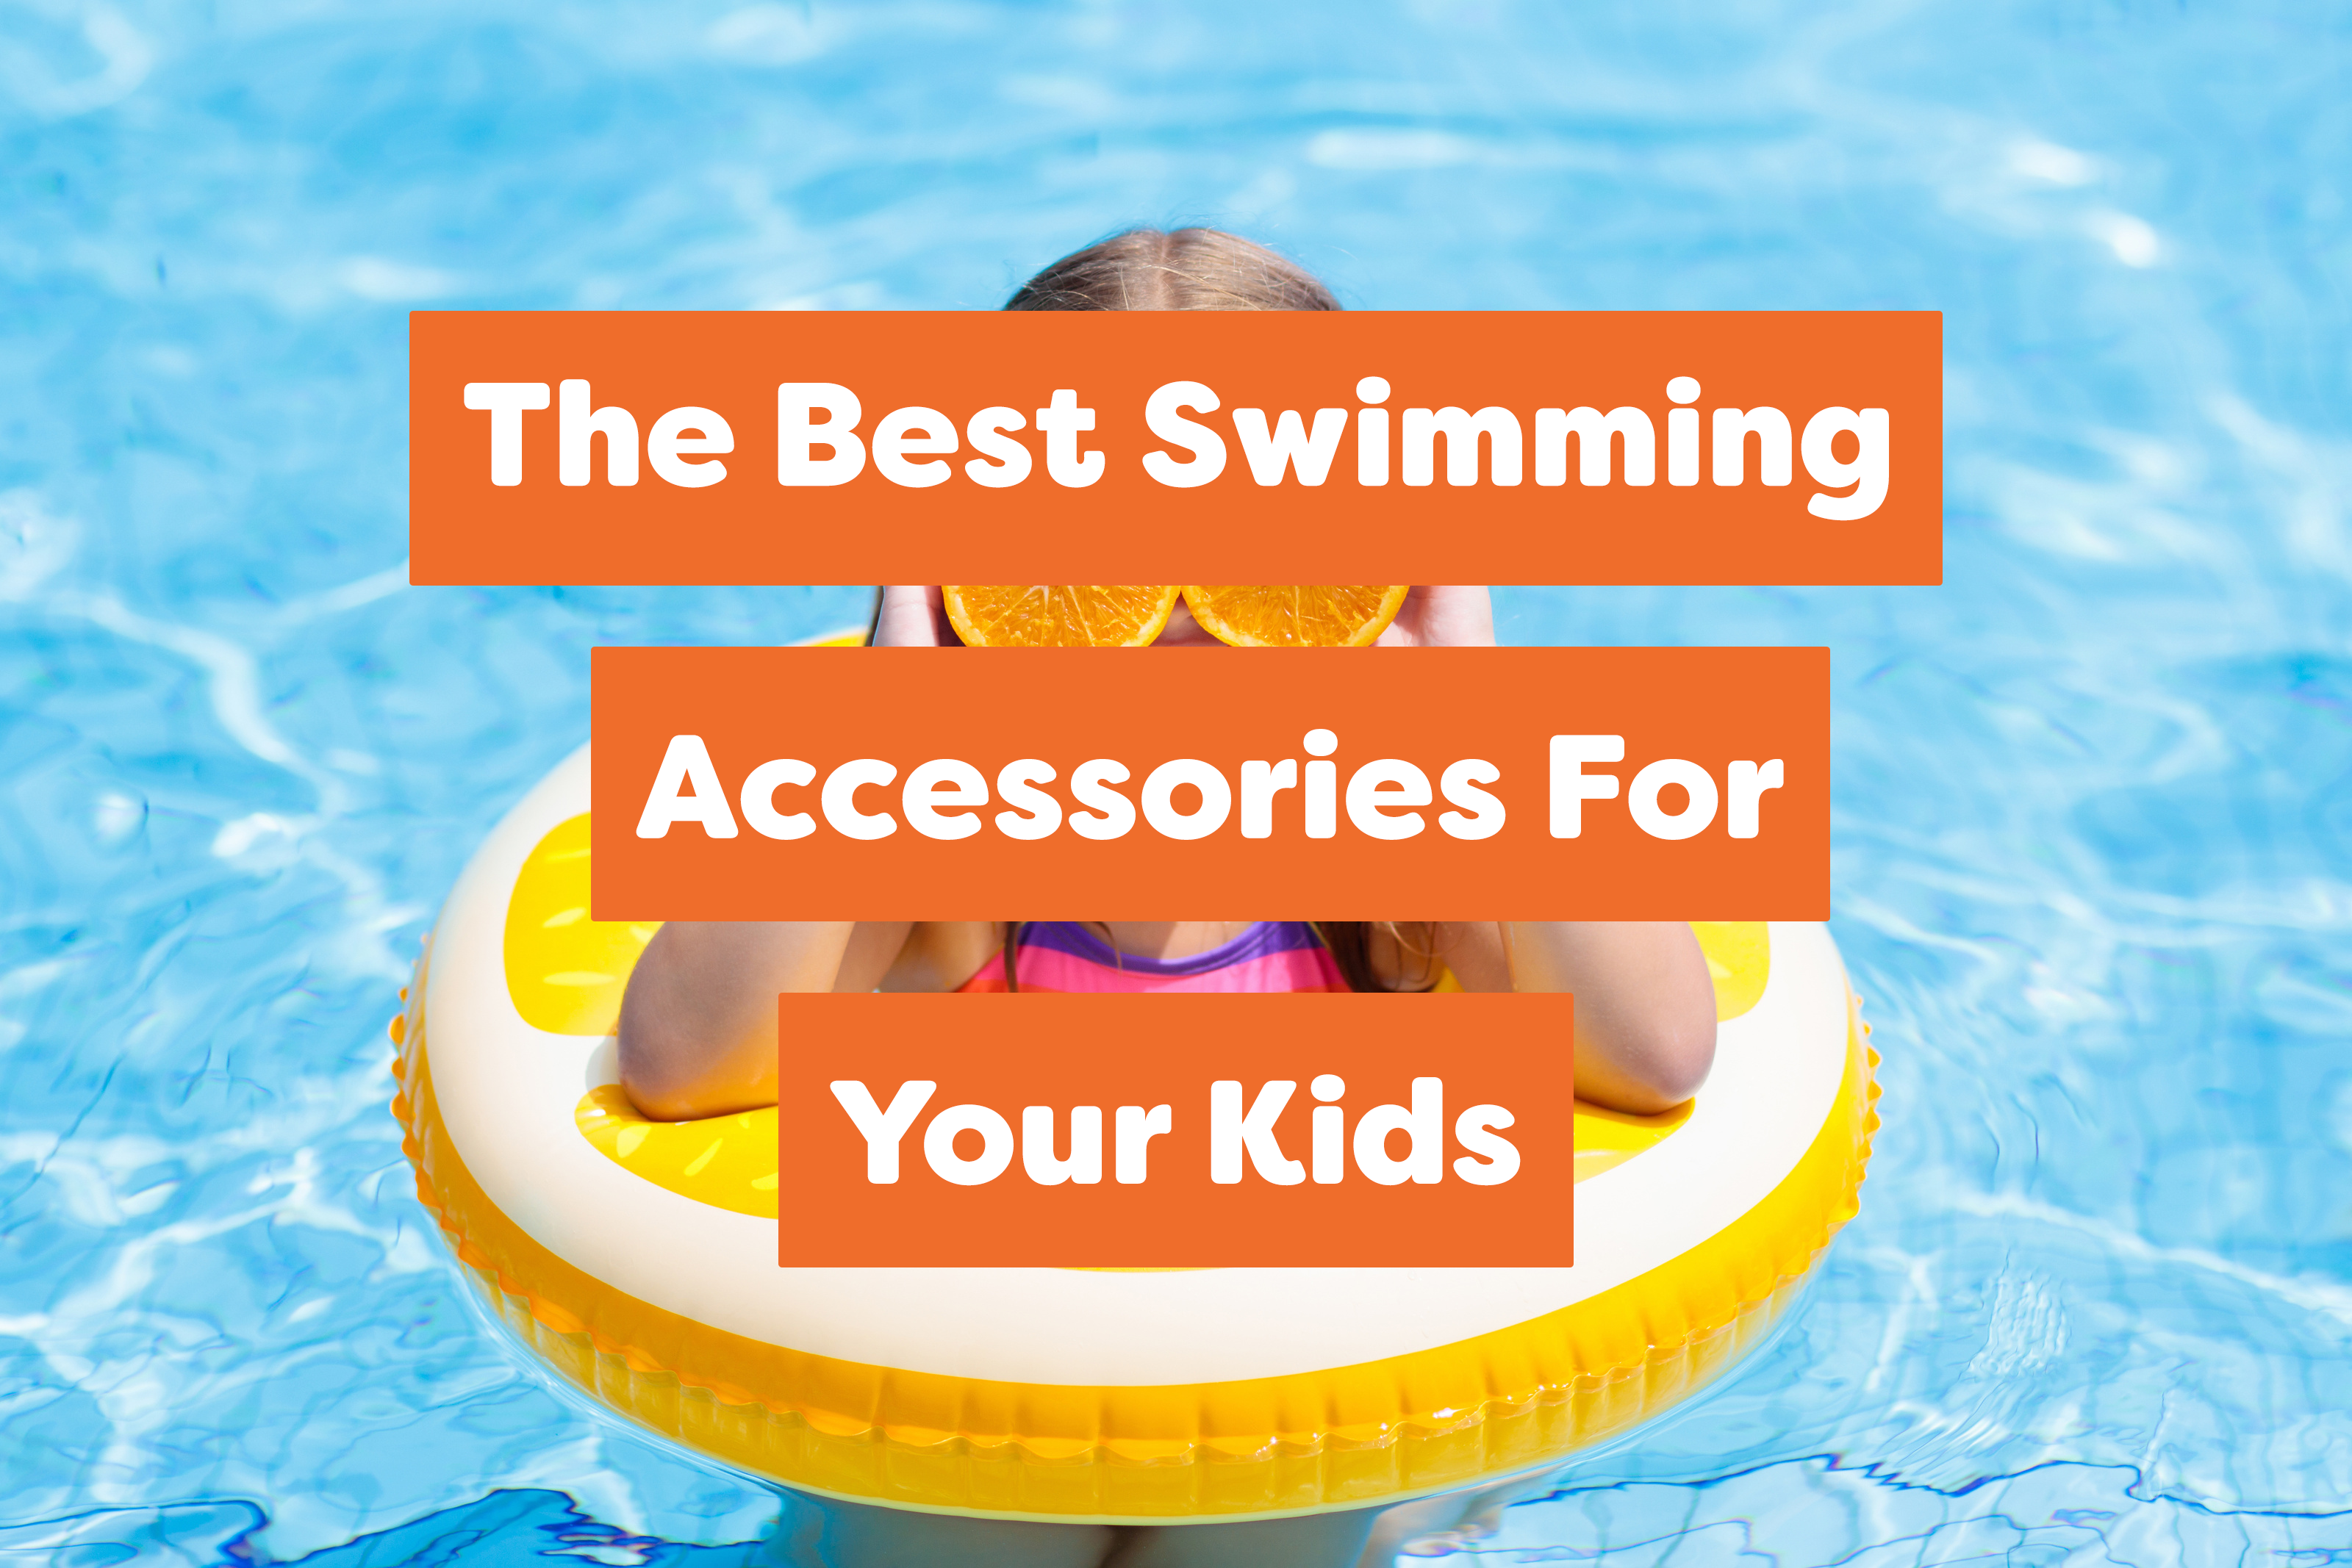 The Best Swimming Accessories For Your Kids